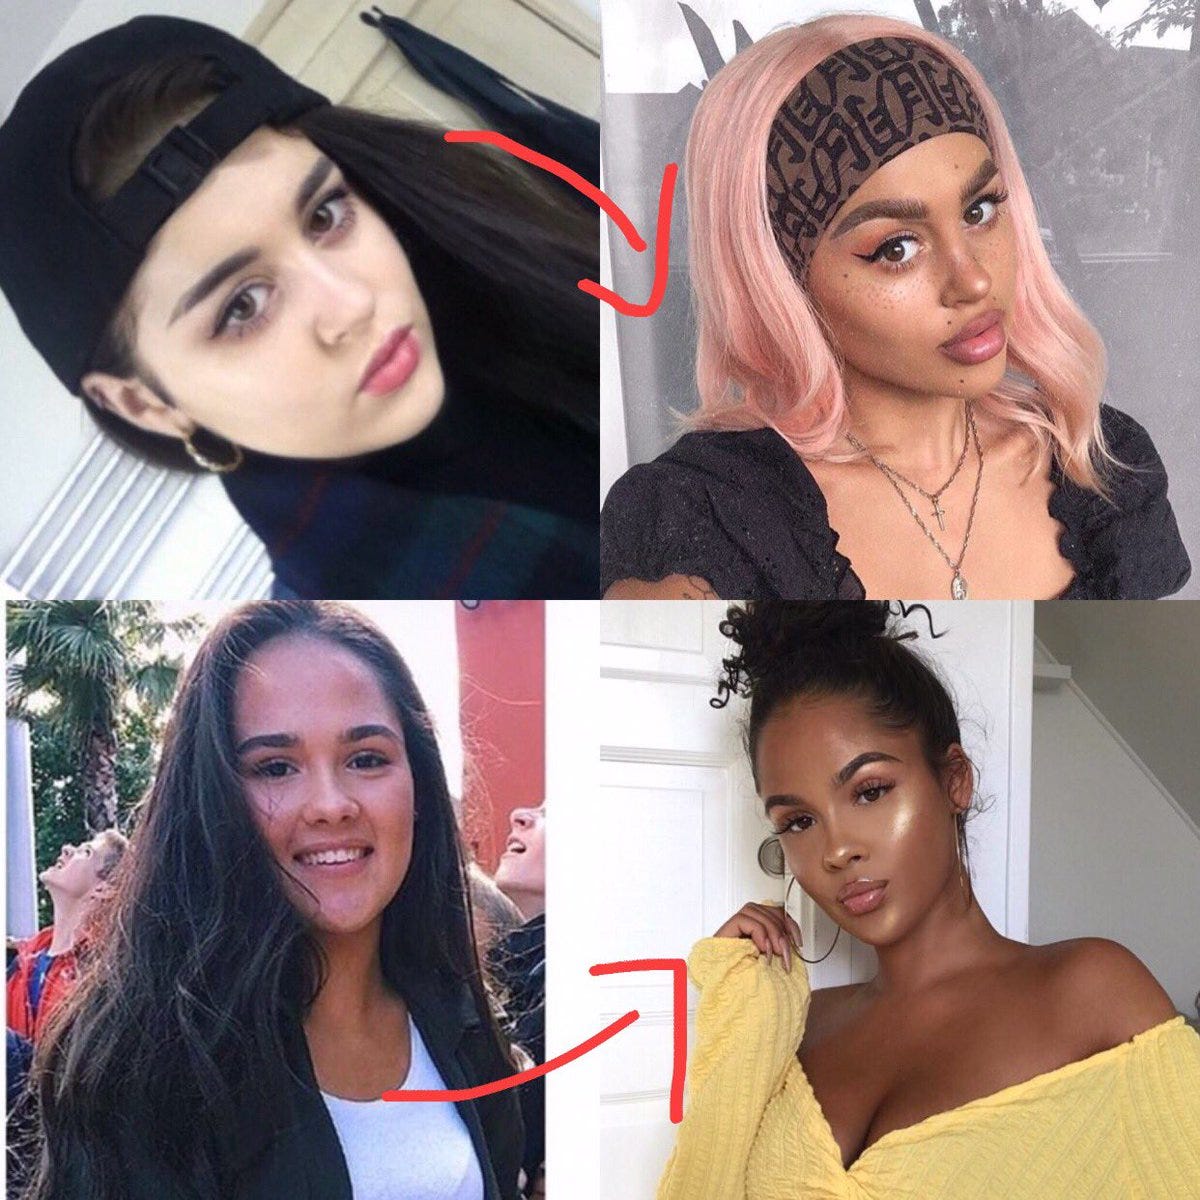 UPDATED! Blackface 2.0: The Trend of White Women Posing as Black